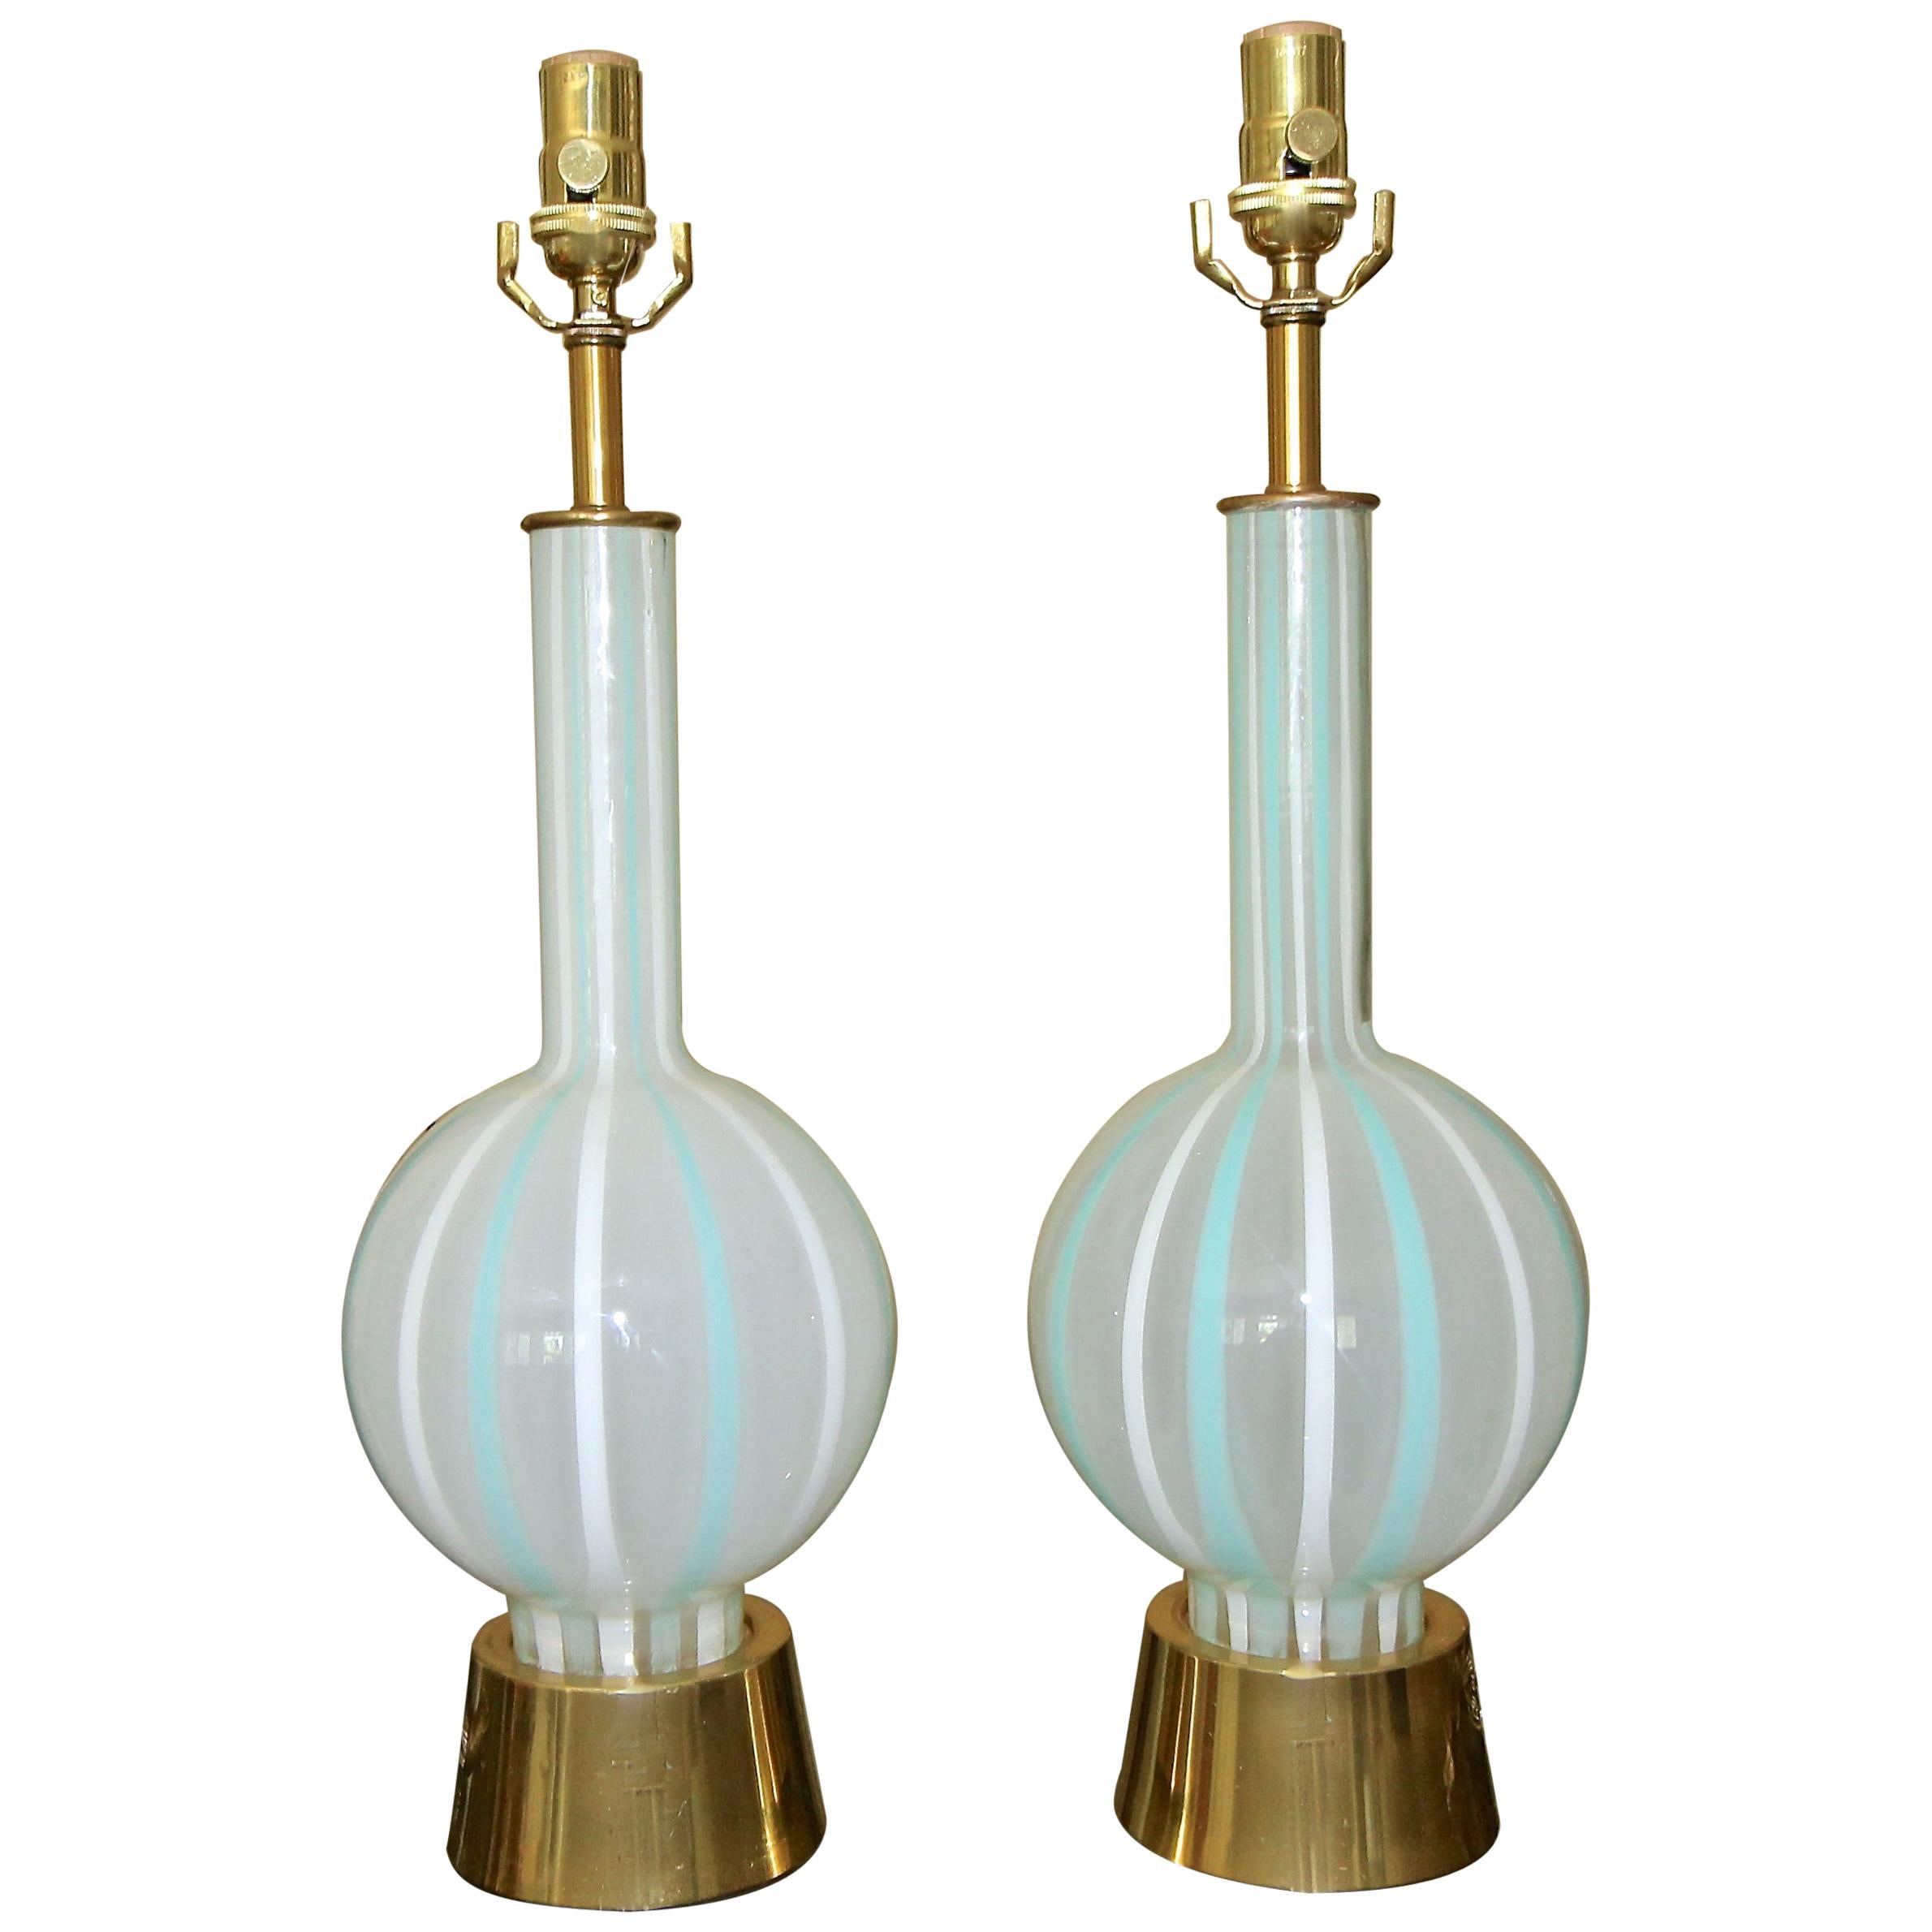 Pair of Teal and White Striped Glass Table Lamps